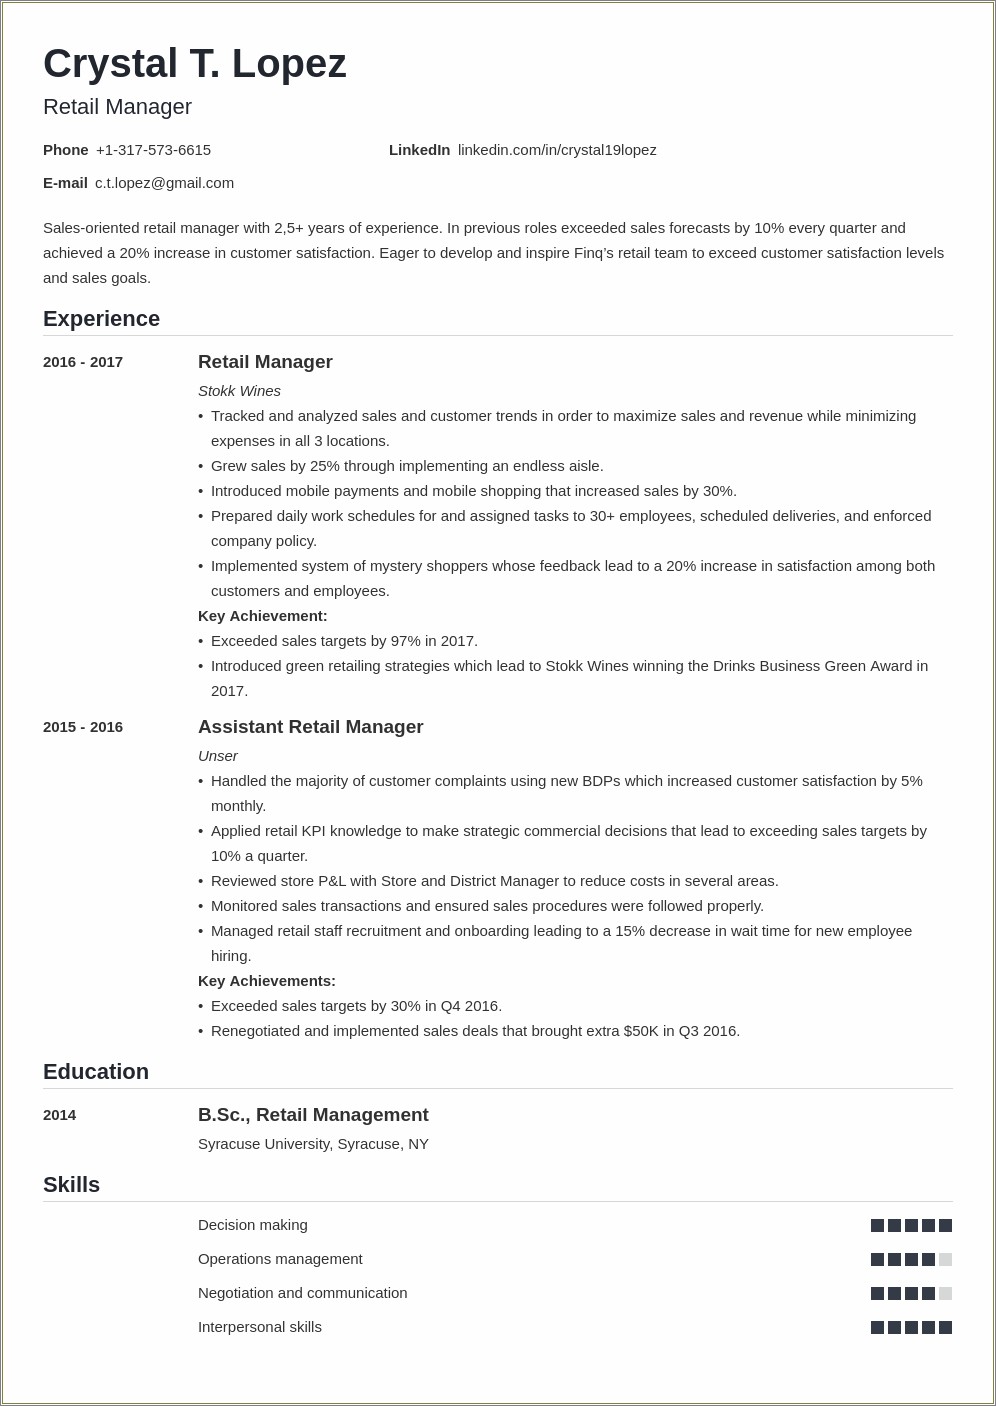 Examples Of Resumes For Store Manager Positions